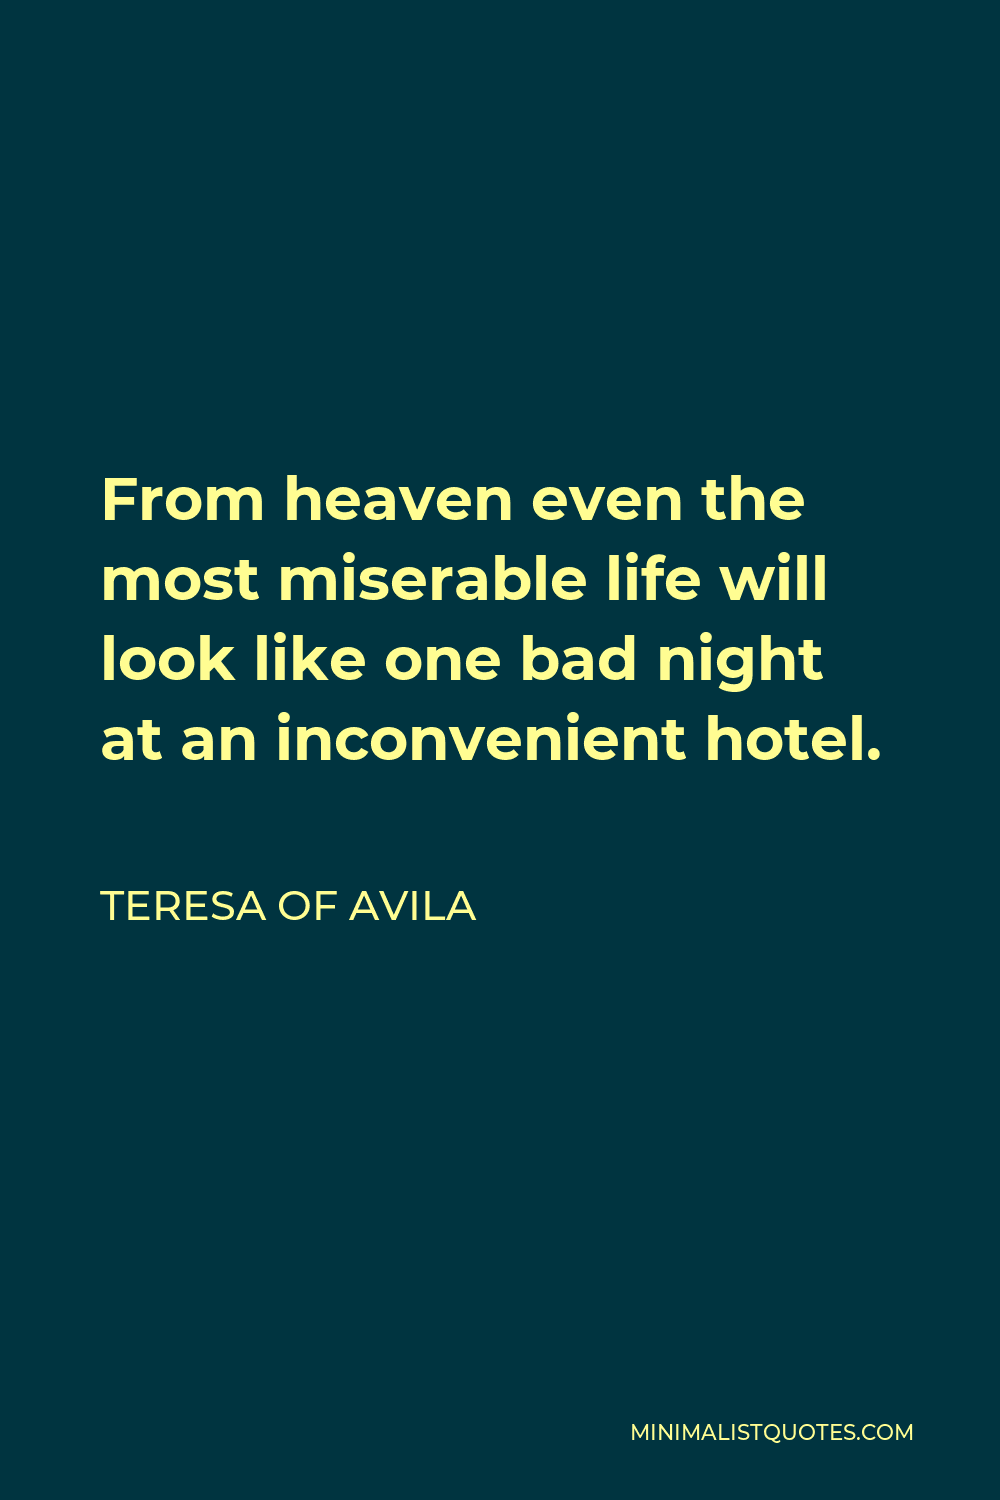 Teresa of Avila Quote - From heaven even the most miserable life will look like one bad night at an inconvenient hotel.